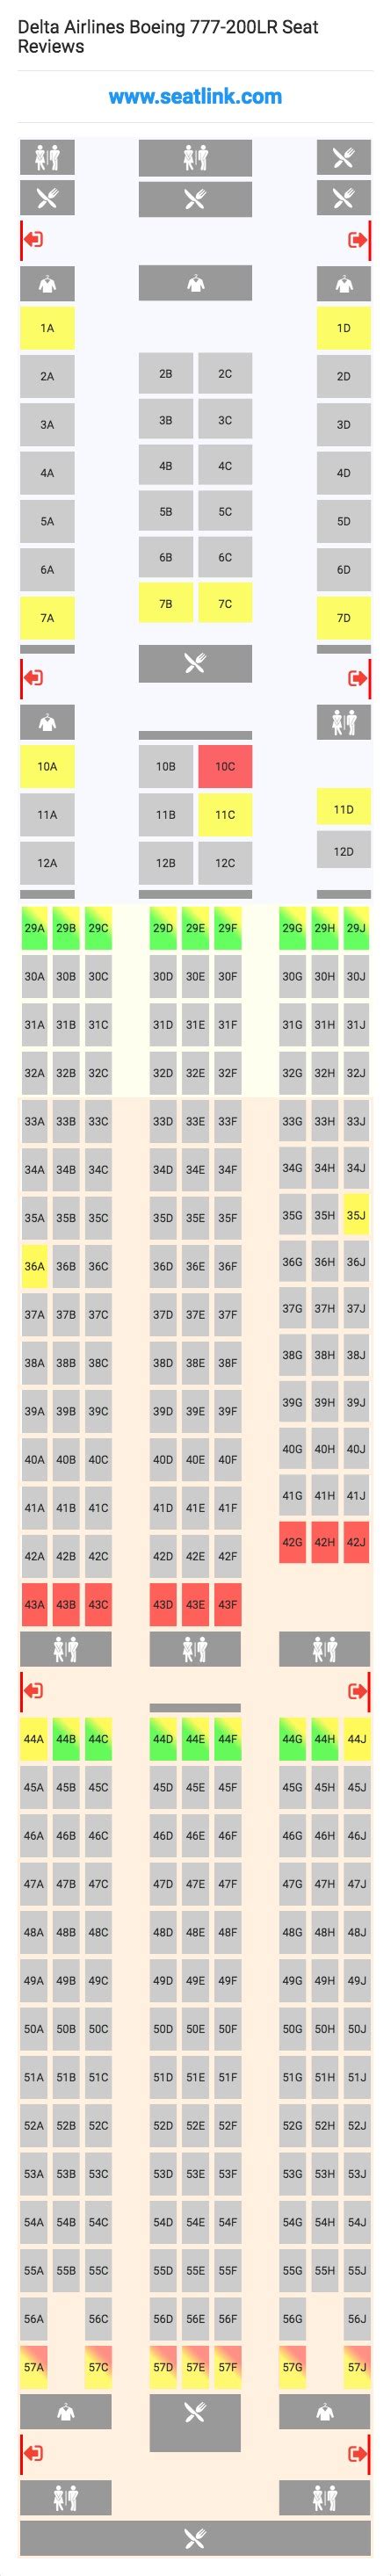 delta airlines boeing  lr seating chart updated july